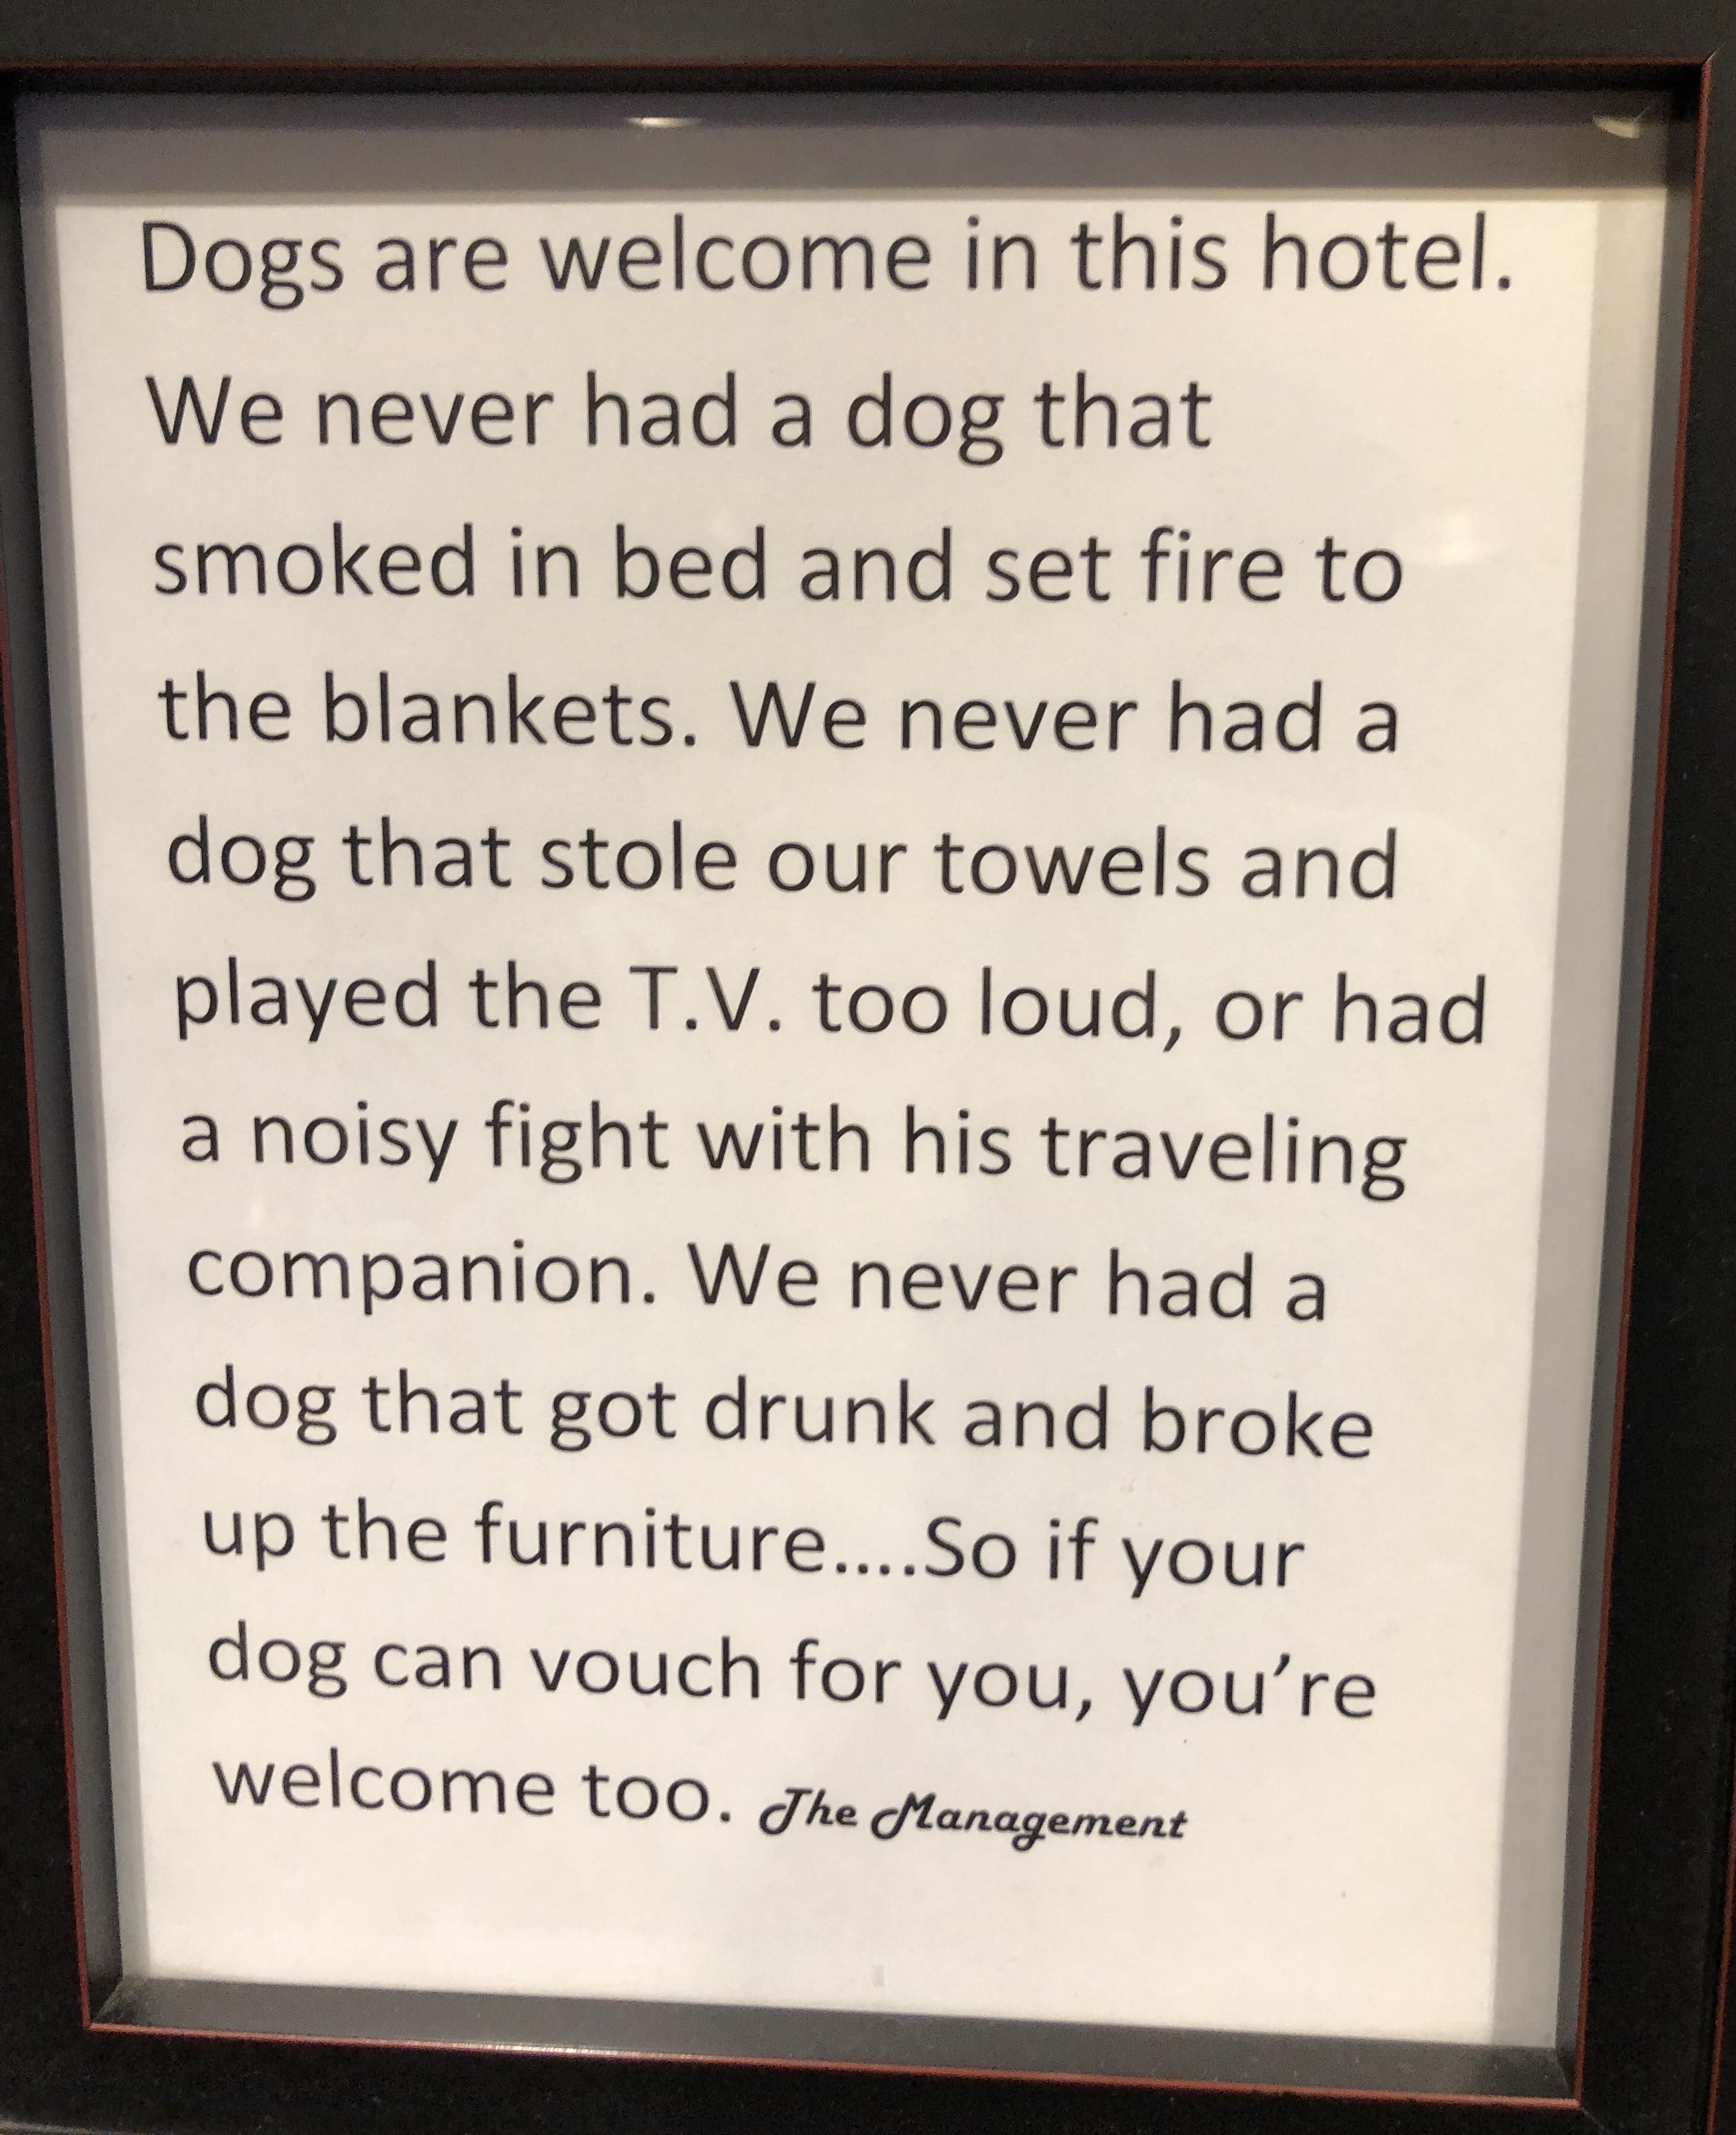 This Hotel